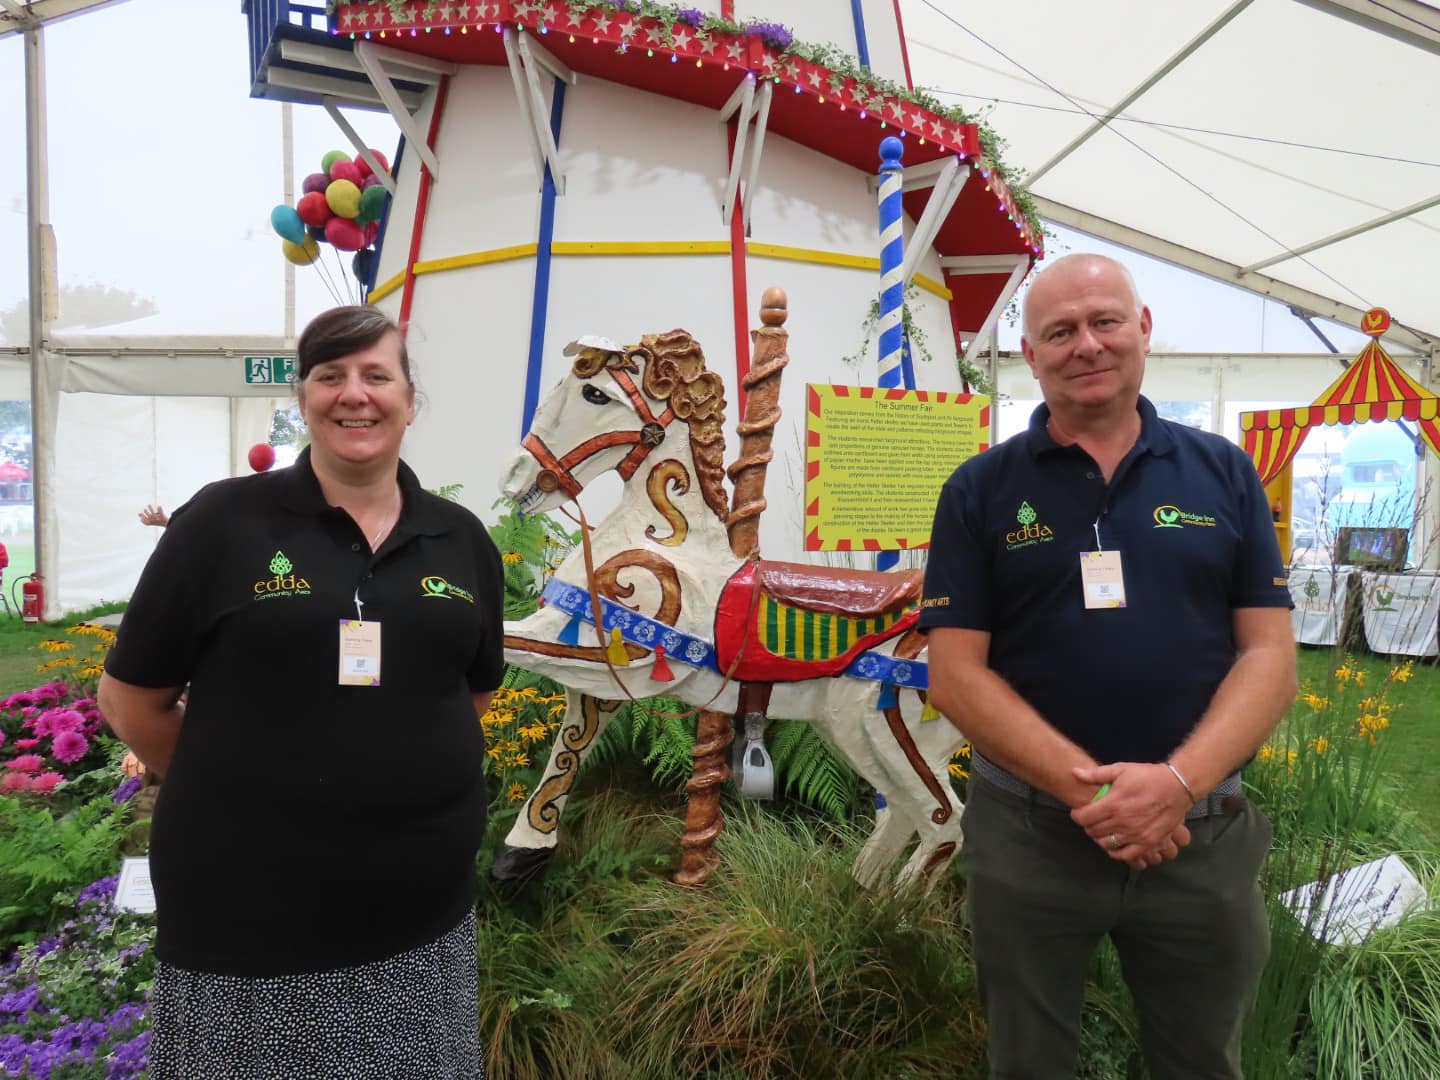 Cheryl and Carl Craven from Edda and Bridge Inn Community Farm at Southport Flower Show.Photo by Andrew Brown Media